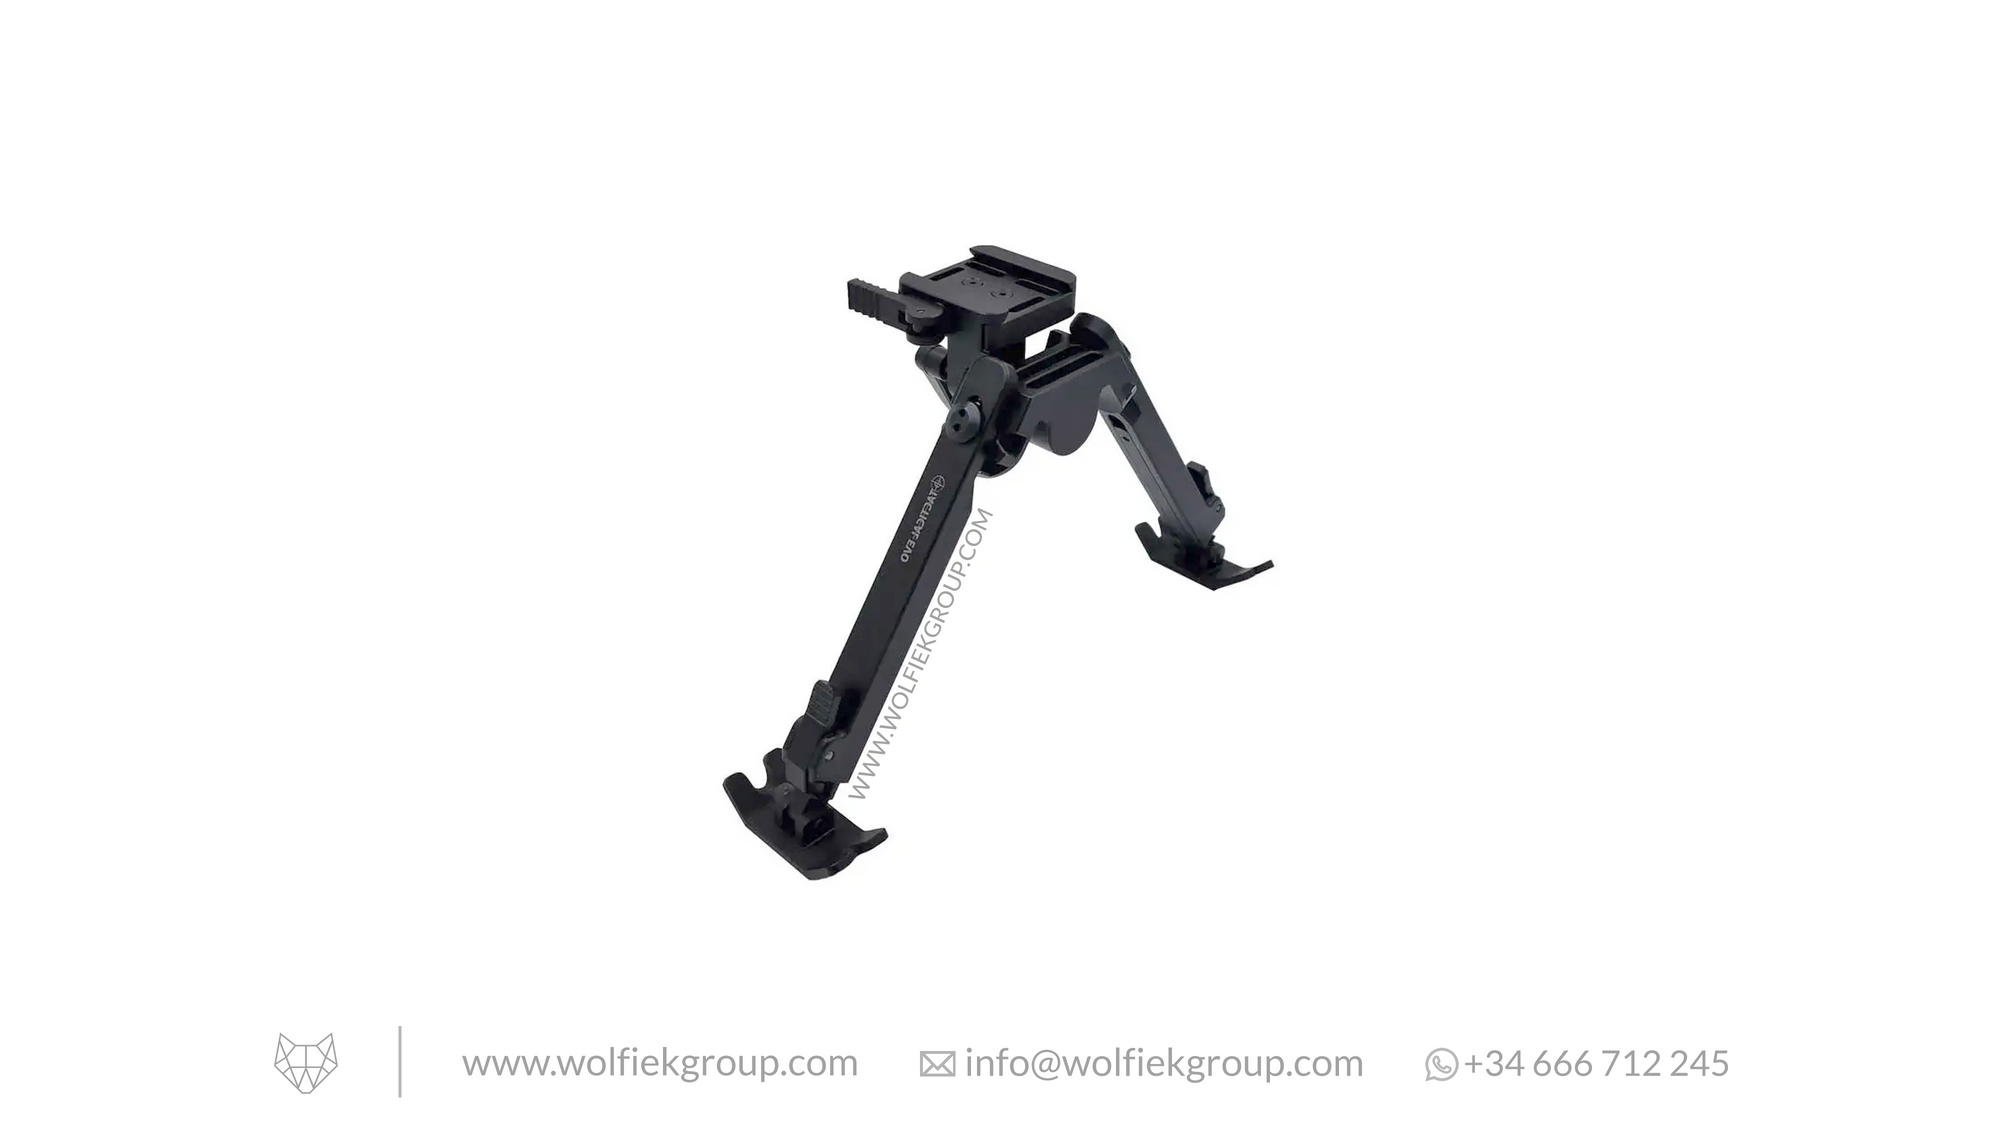 Bipod TACTICAL TK3 6,5-9" with bearing - Weaver or Arcca Swiss System